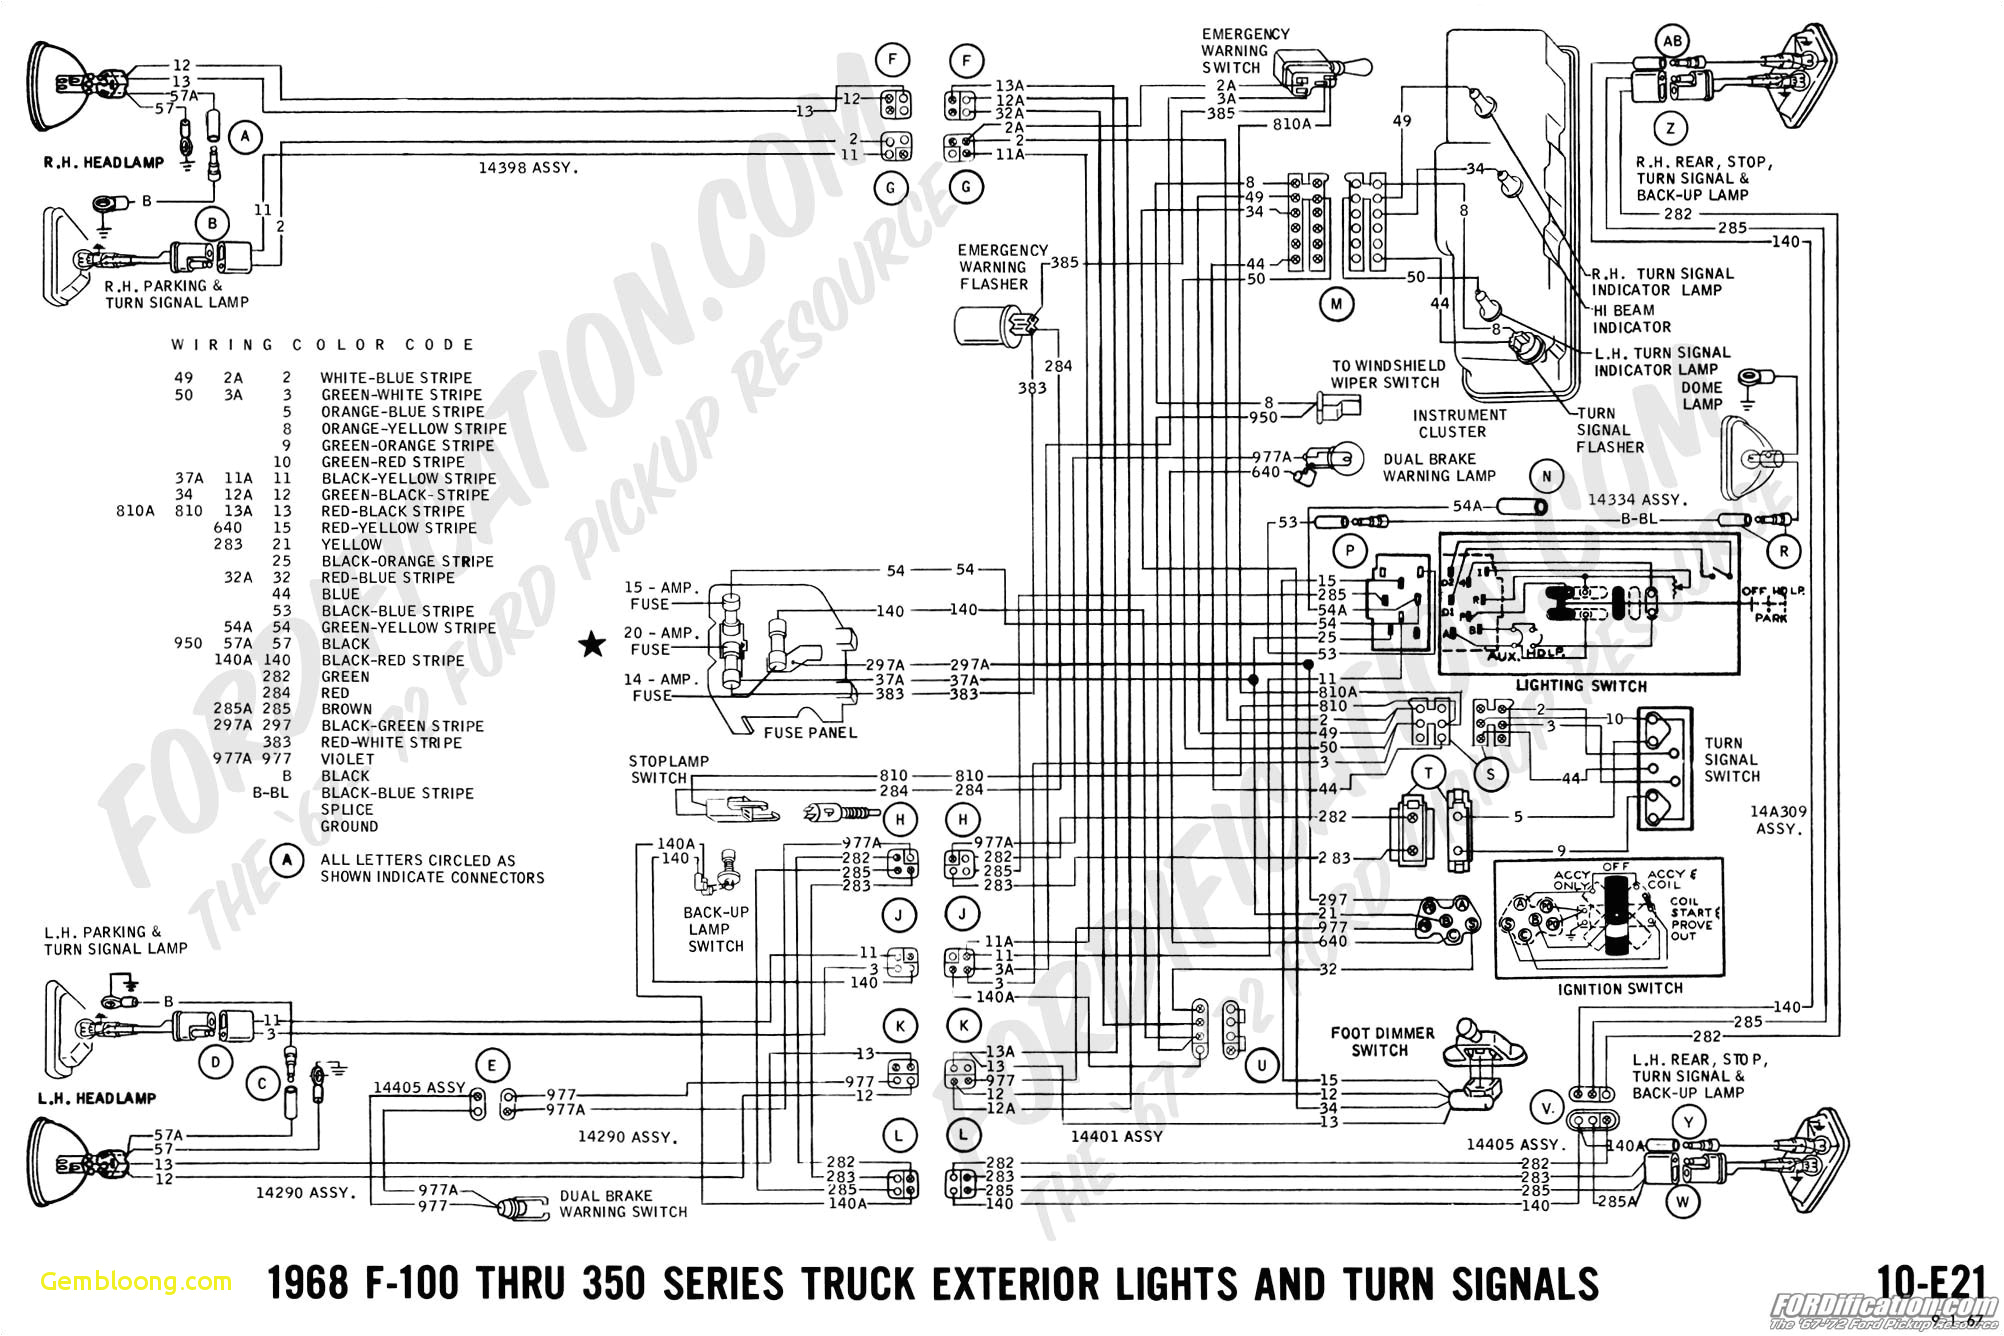 1953 ford truck wiring harness wiring diagram article review 1953 ford truck wiring harness